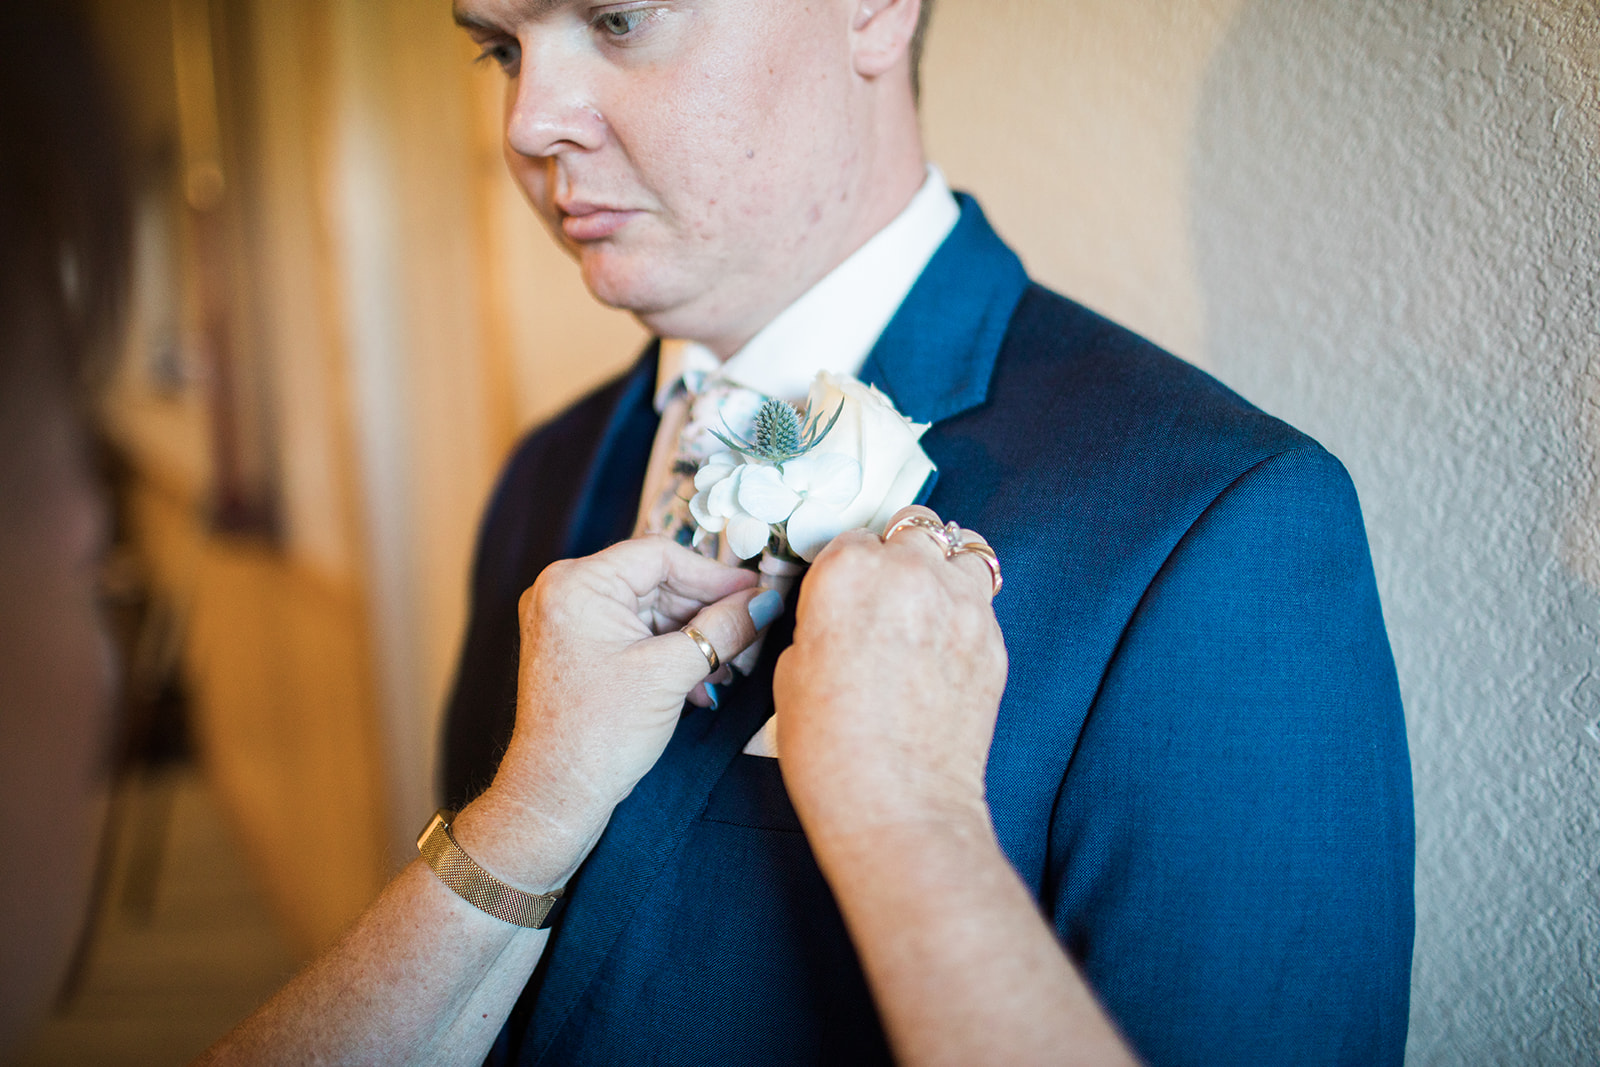 groom gets boutonniere pinned to suit jacket